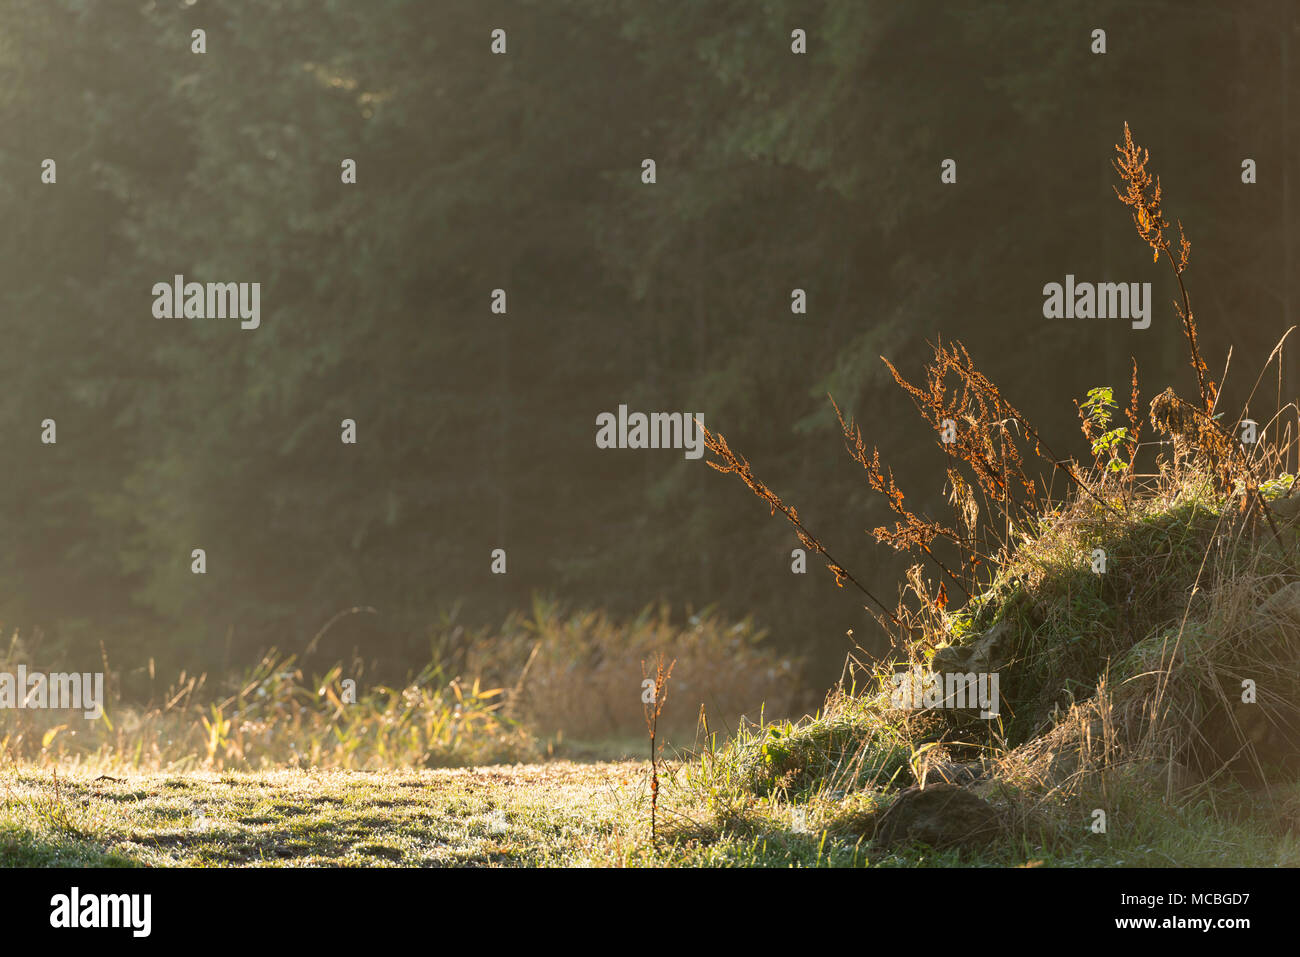 The Dried Stems of Dock, Backlit, on a Grassy Bank in a Forest Clearing Stock Photo